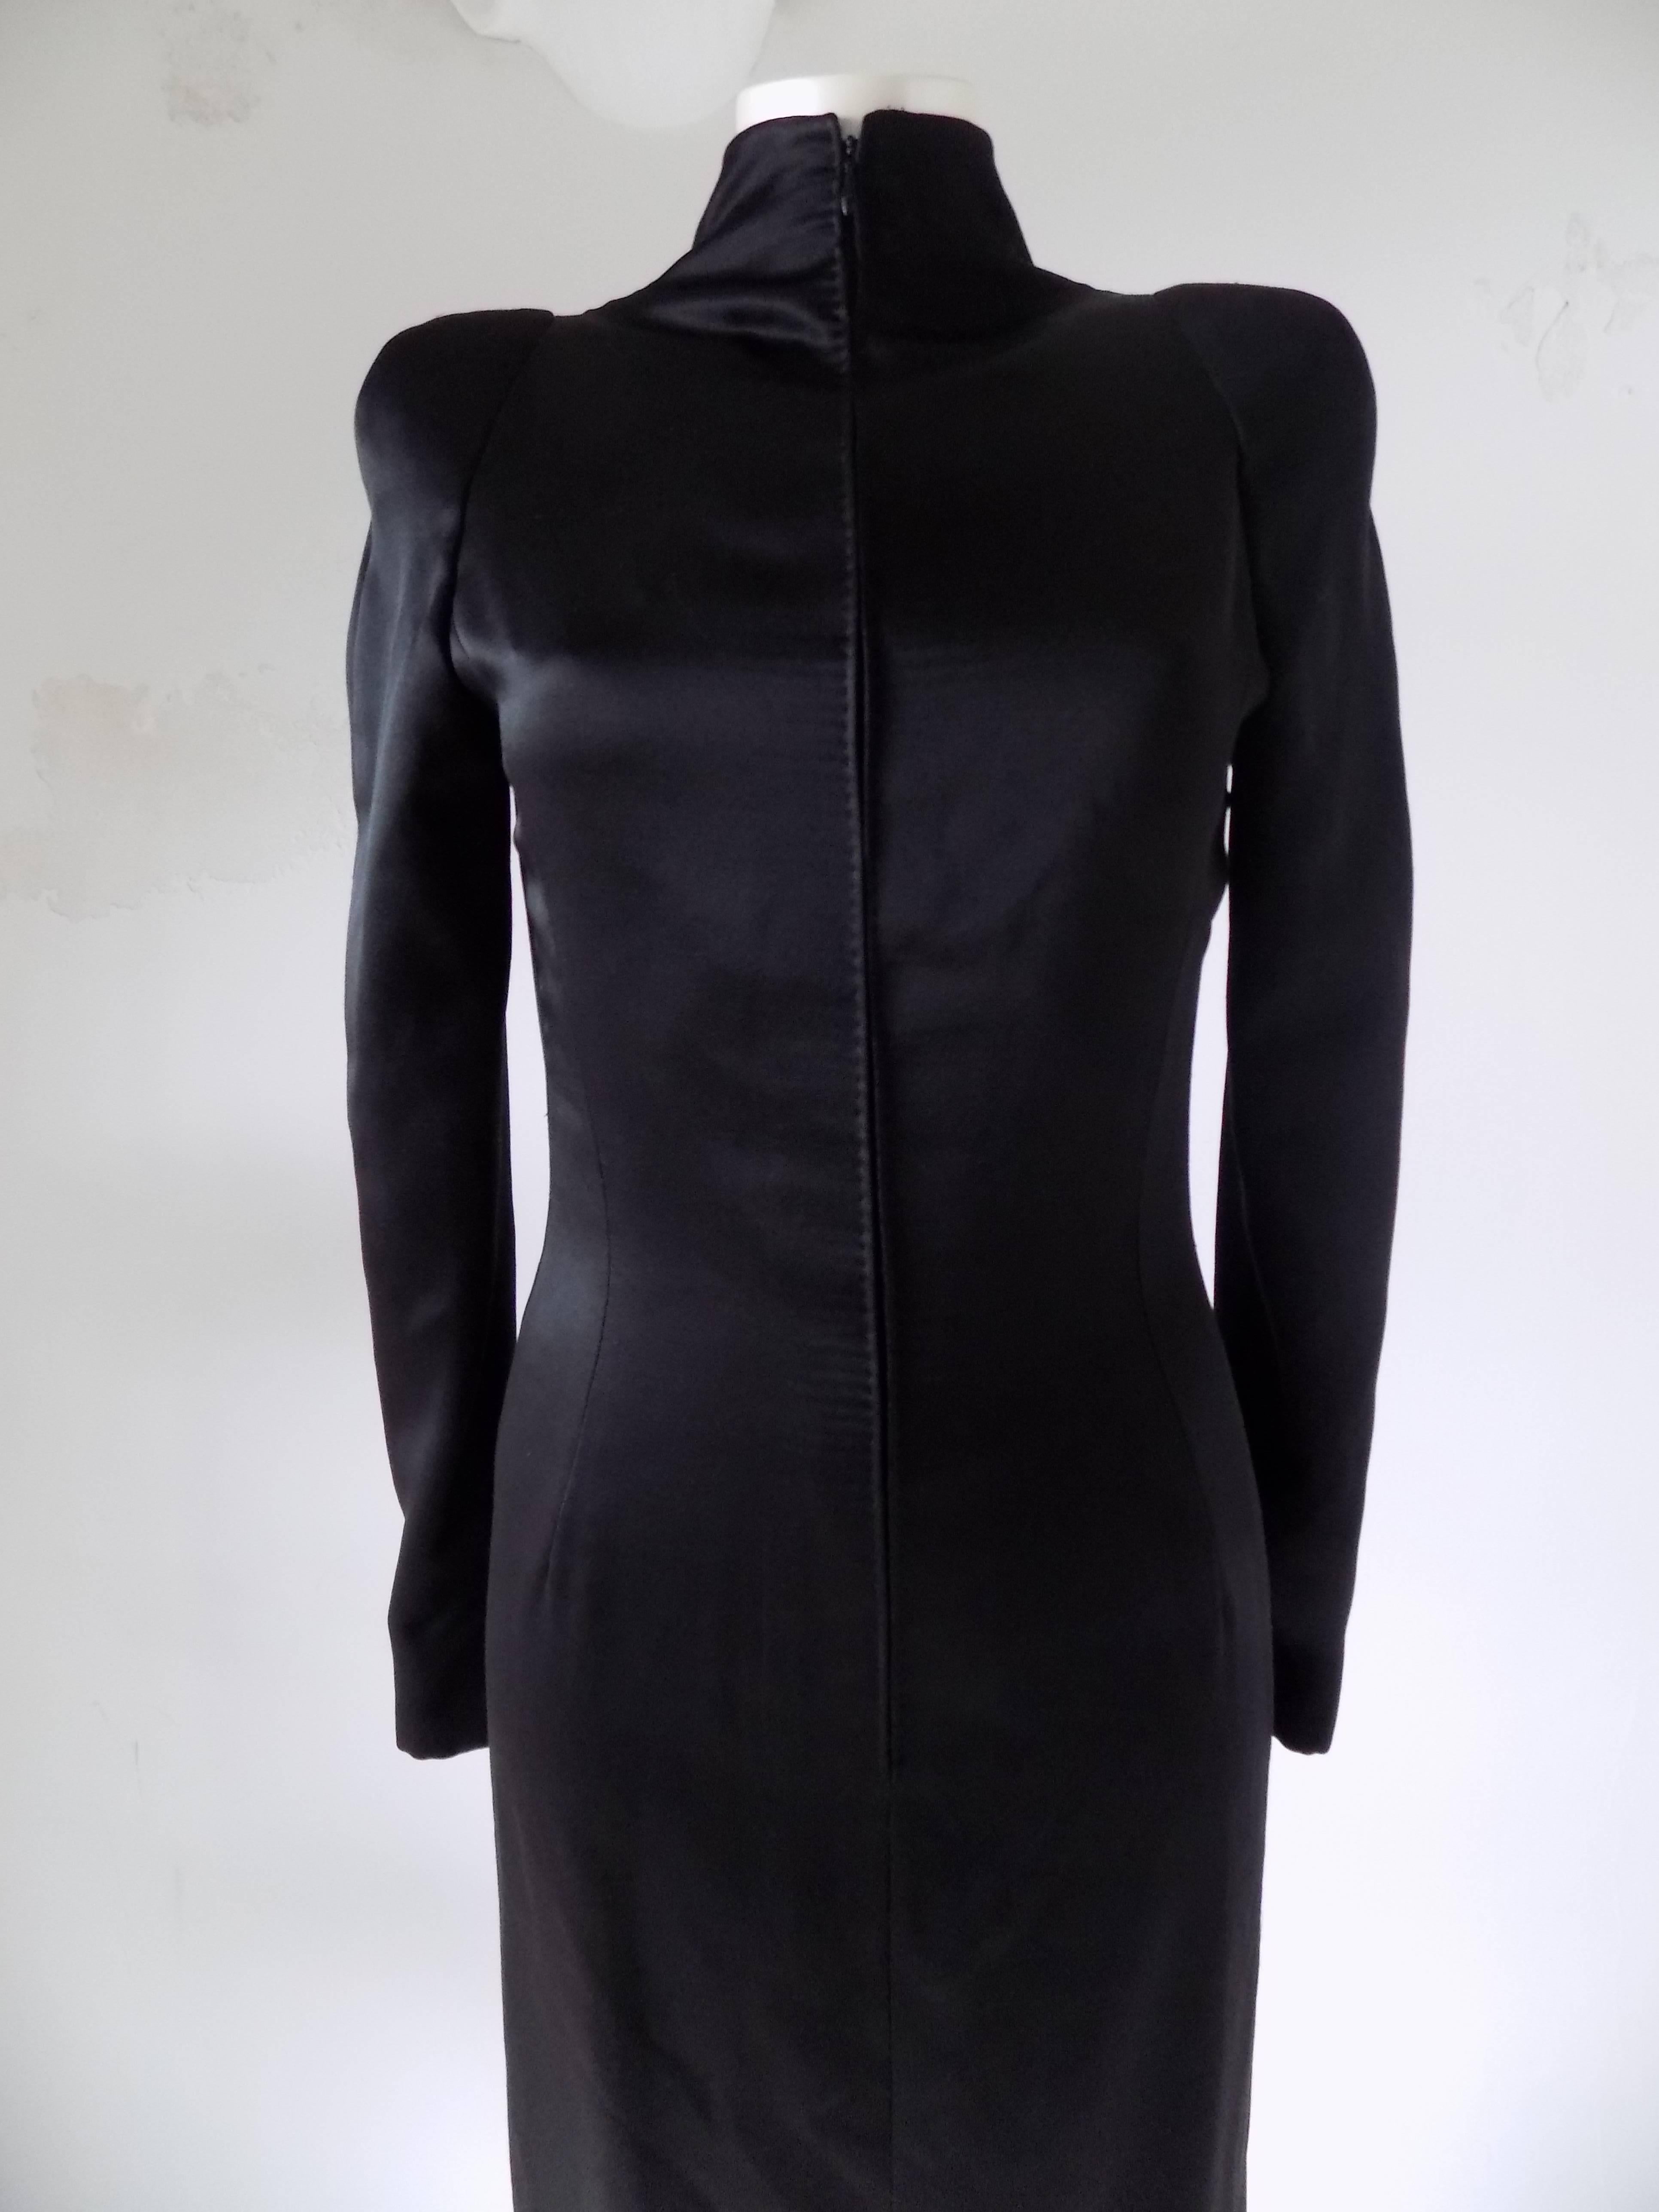 1980s Genny by Gianni Versace long black dress
One of a kind, unique museum piece totally made in italy